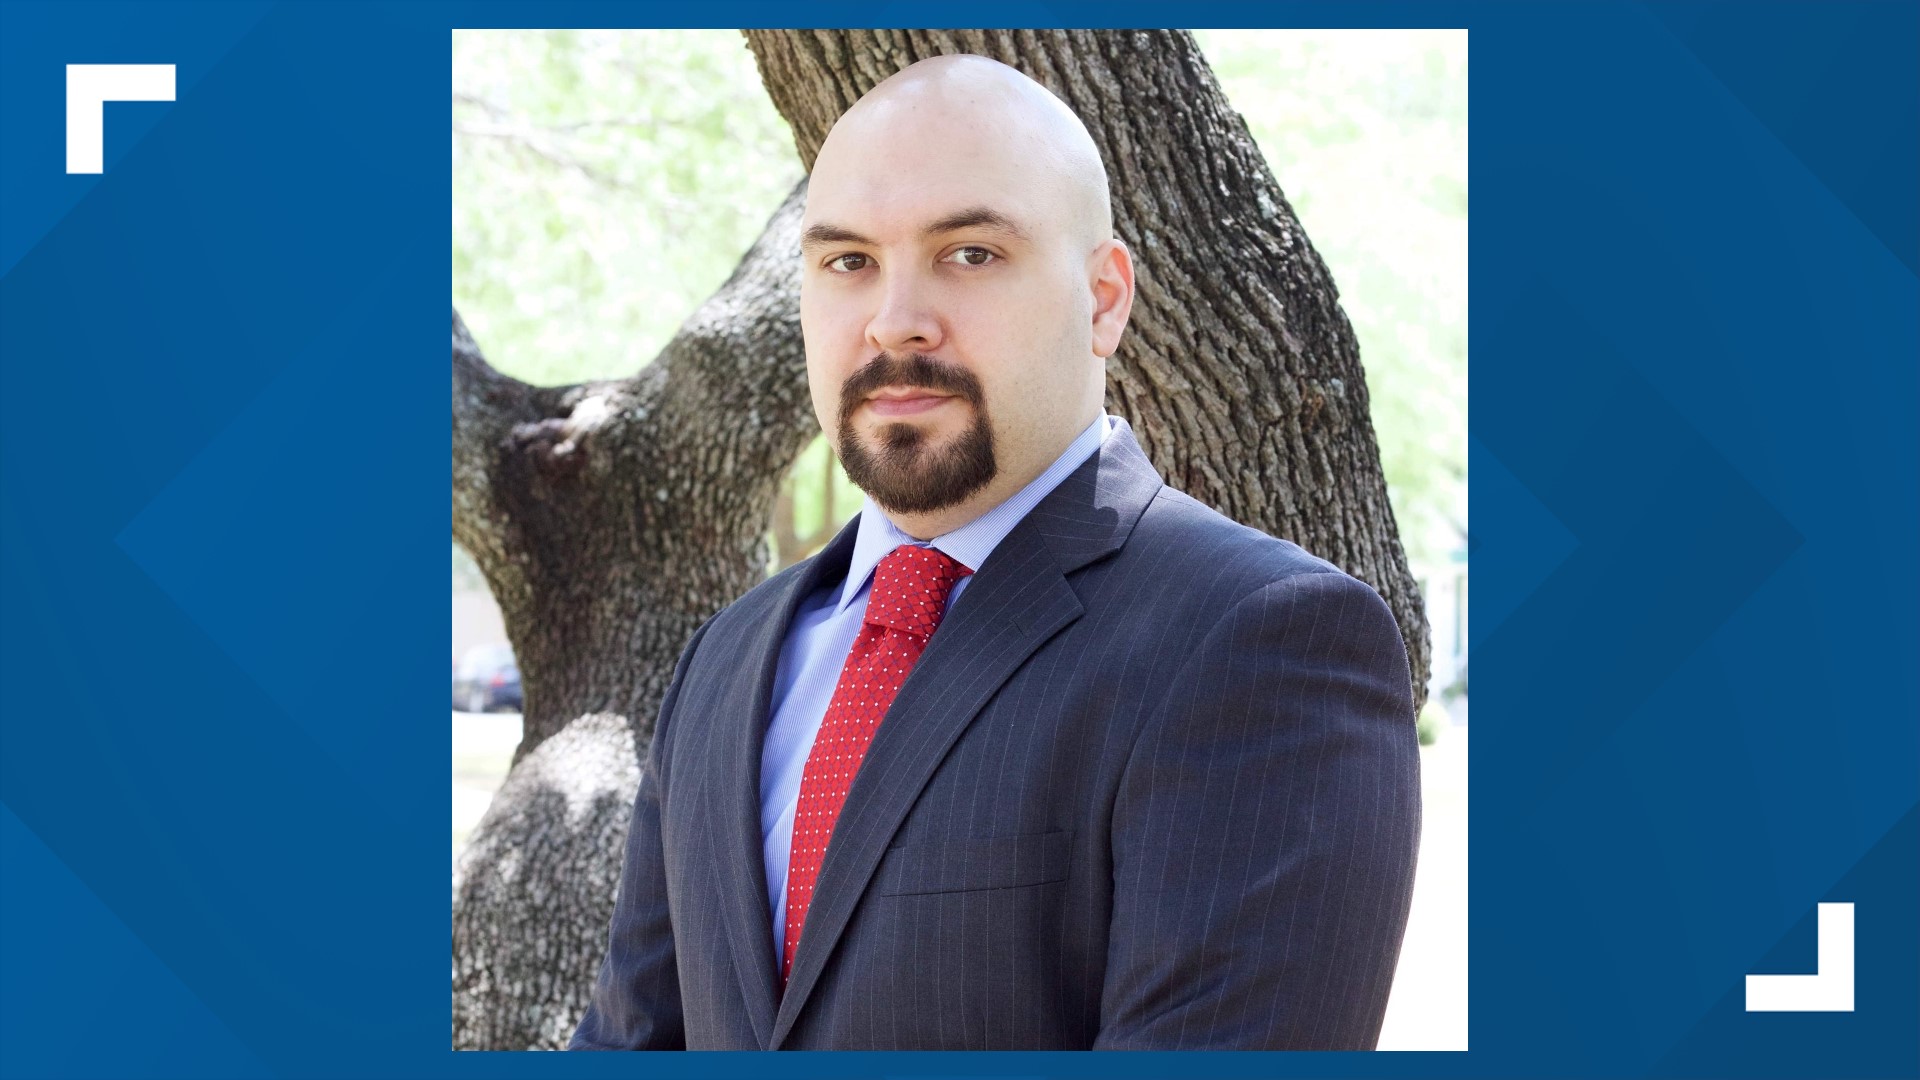 The Republican candidate is a former officer with the Castle Hills Police Department and former deputy in Bexar County.